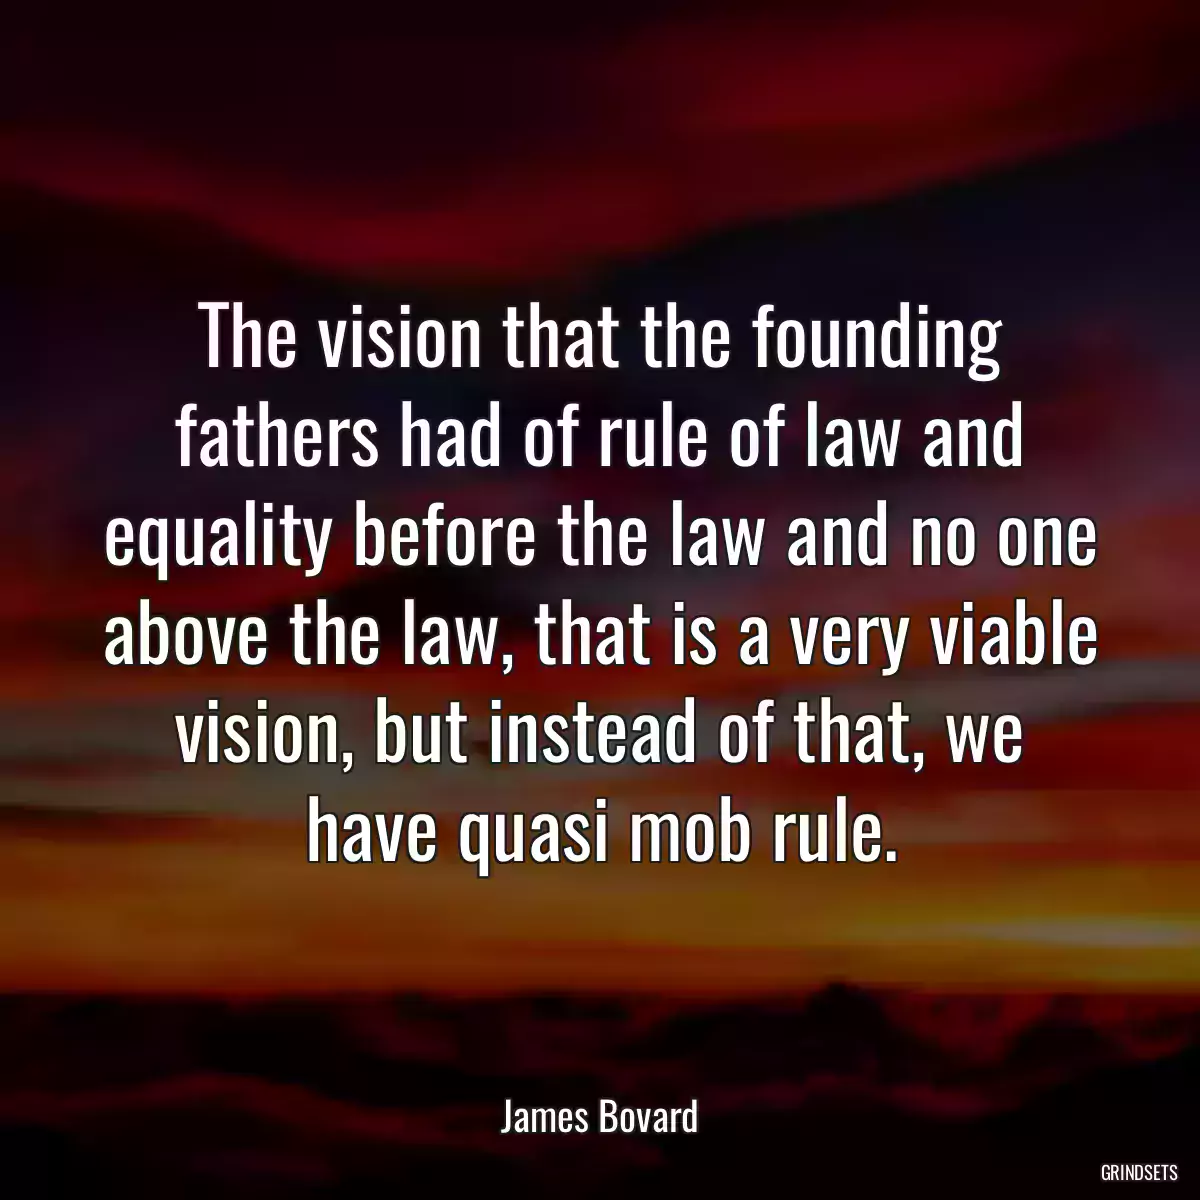 The vision that the founding fathers had of rule of law and equality before the law and no one above the law, that is a very viable vision, but instead of that, we have quasi mob rule.